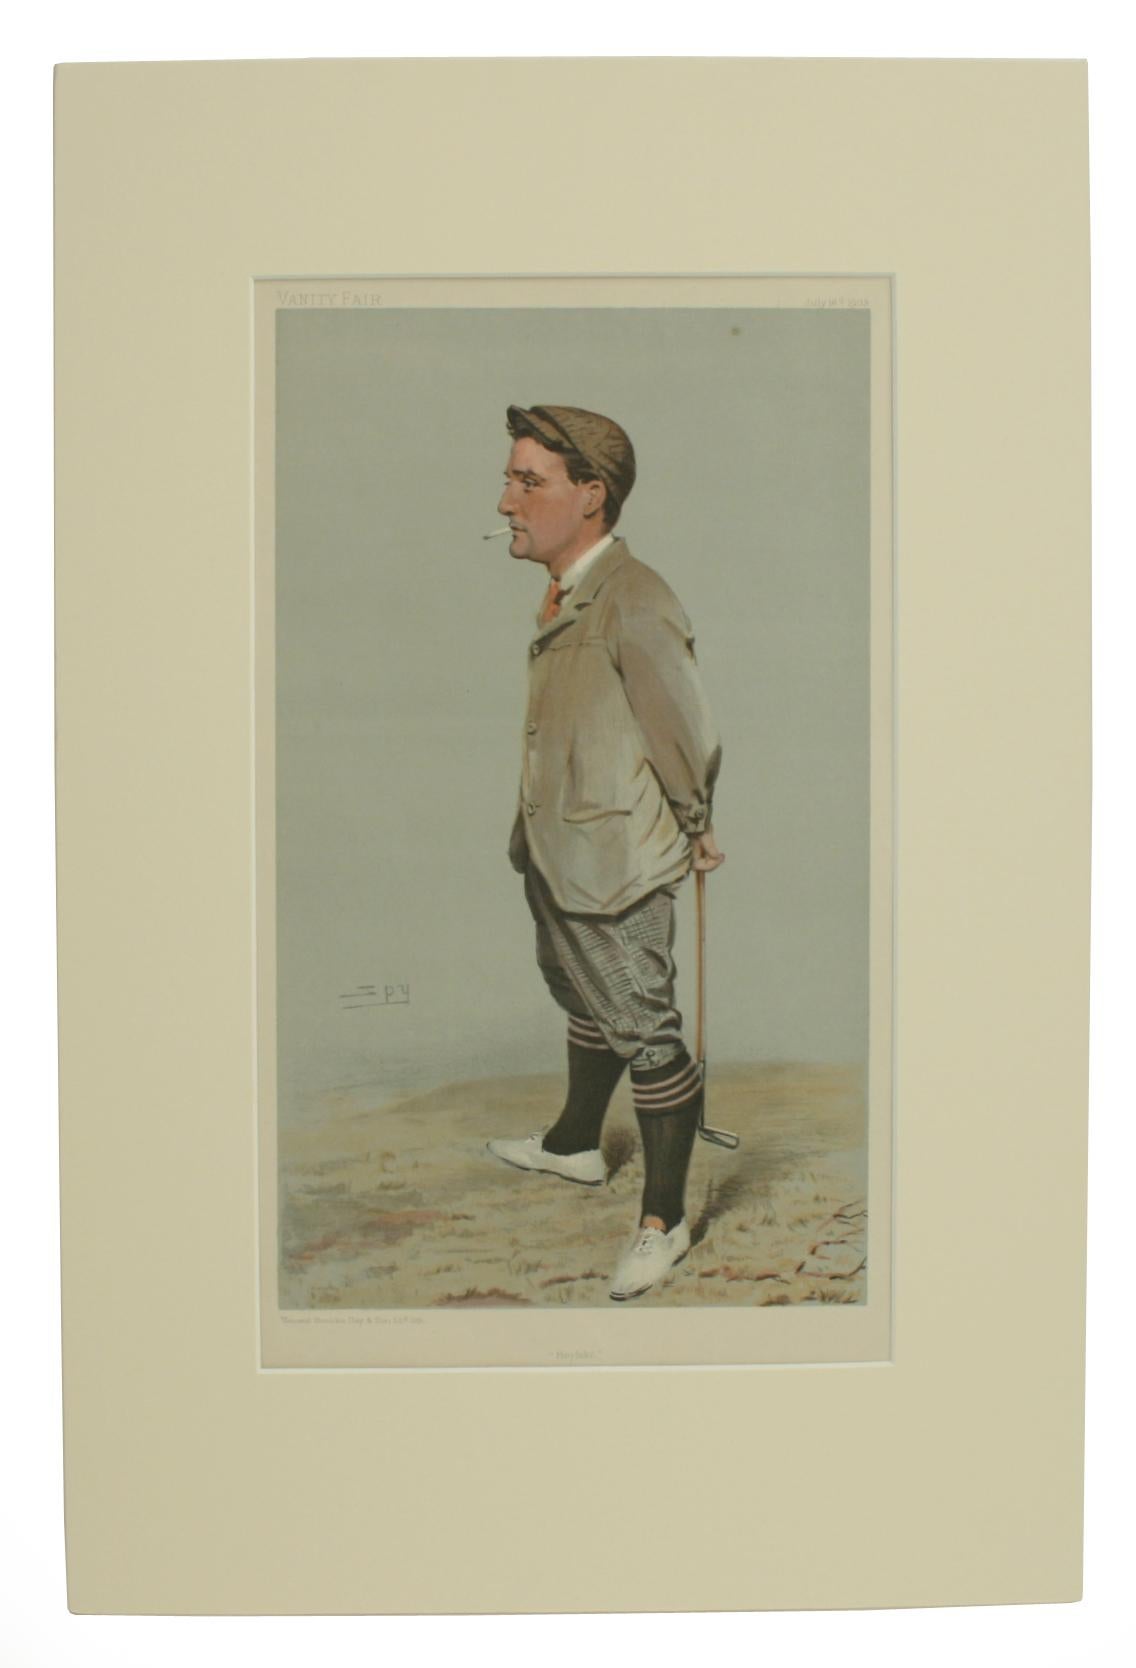 Vanity Fair golf print 'Horace Harold Hilton, Hoylake'.
This is a single golfing Vanity Fair lithographic portrait print 'Horace Harold Hilton, Hoylake'. An original print mounted and in good condition.
In total 13 golfing caricatures were